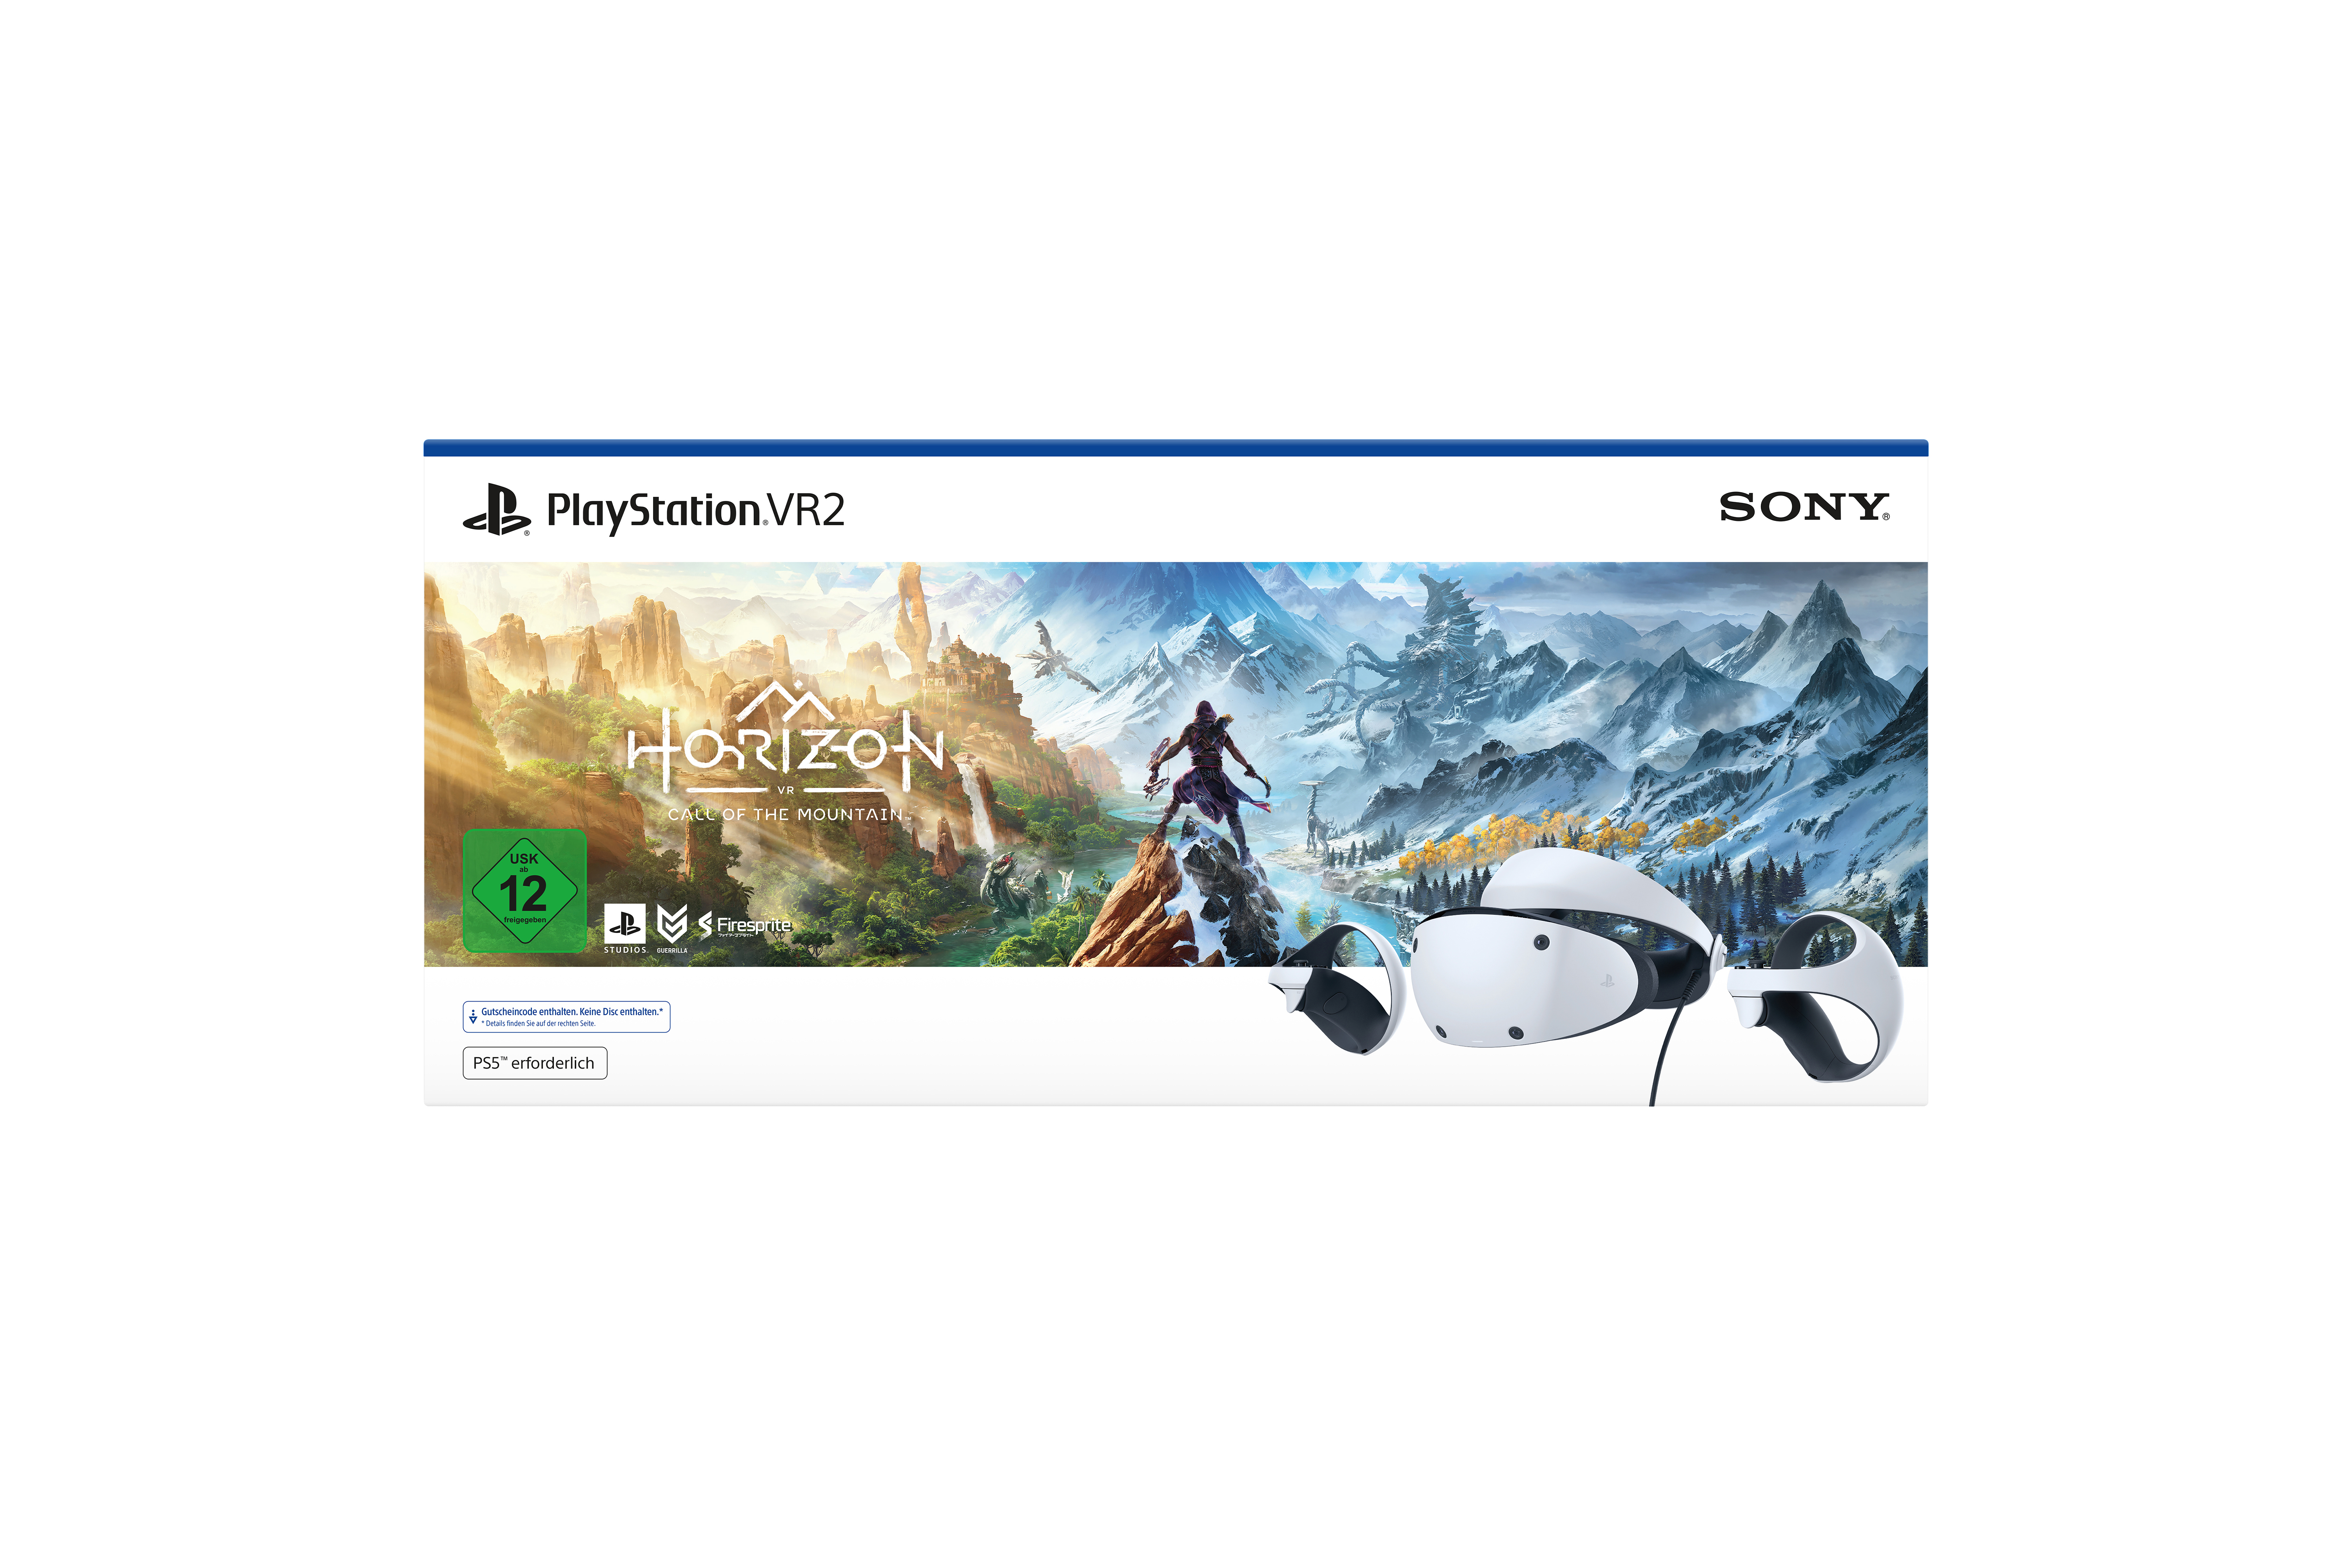 OF CALL THE HORIZON MOUNTAIN System SONY PS VR VR2